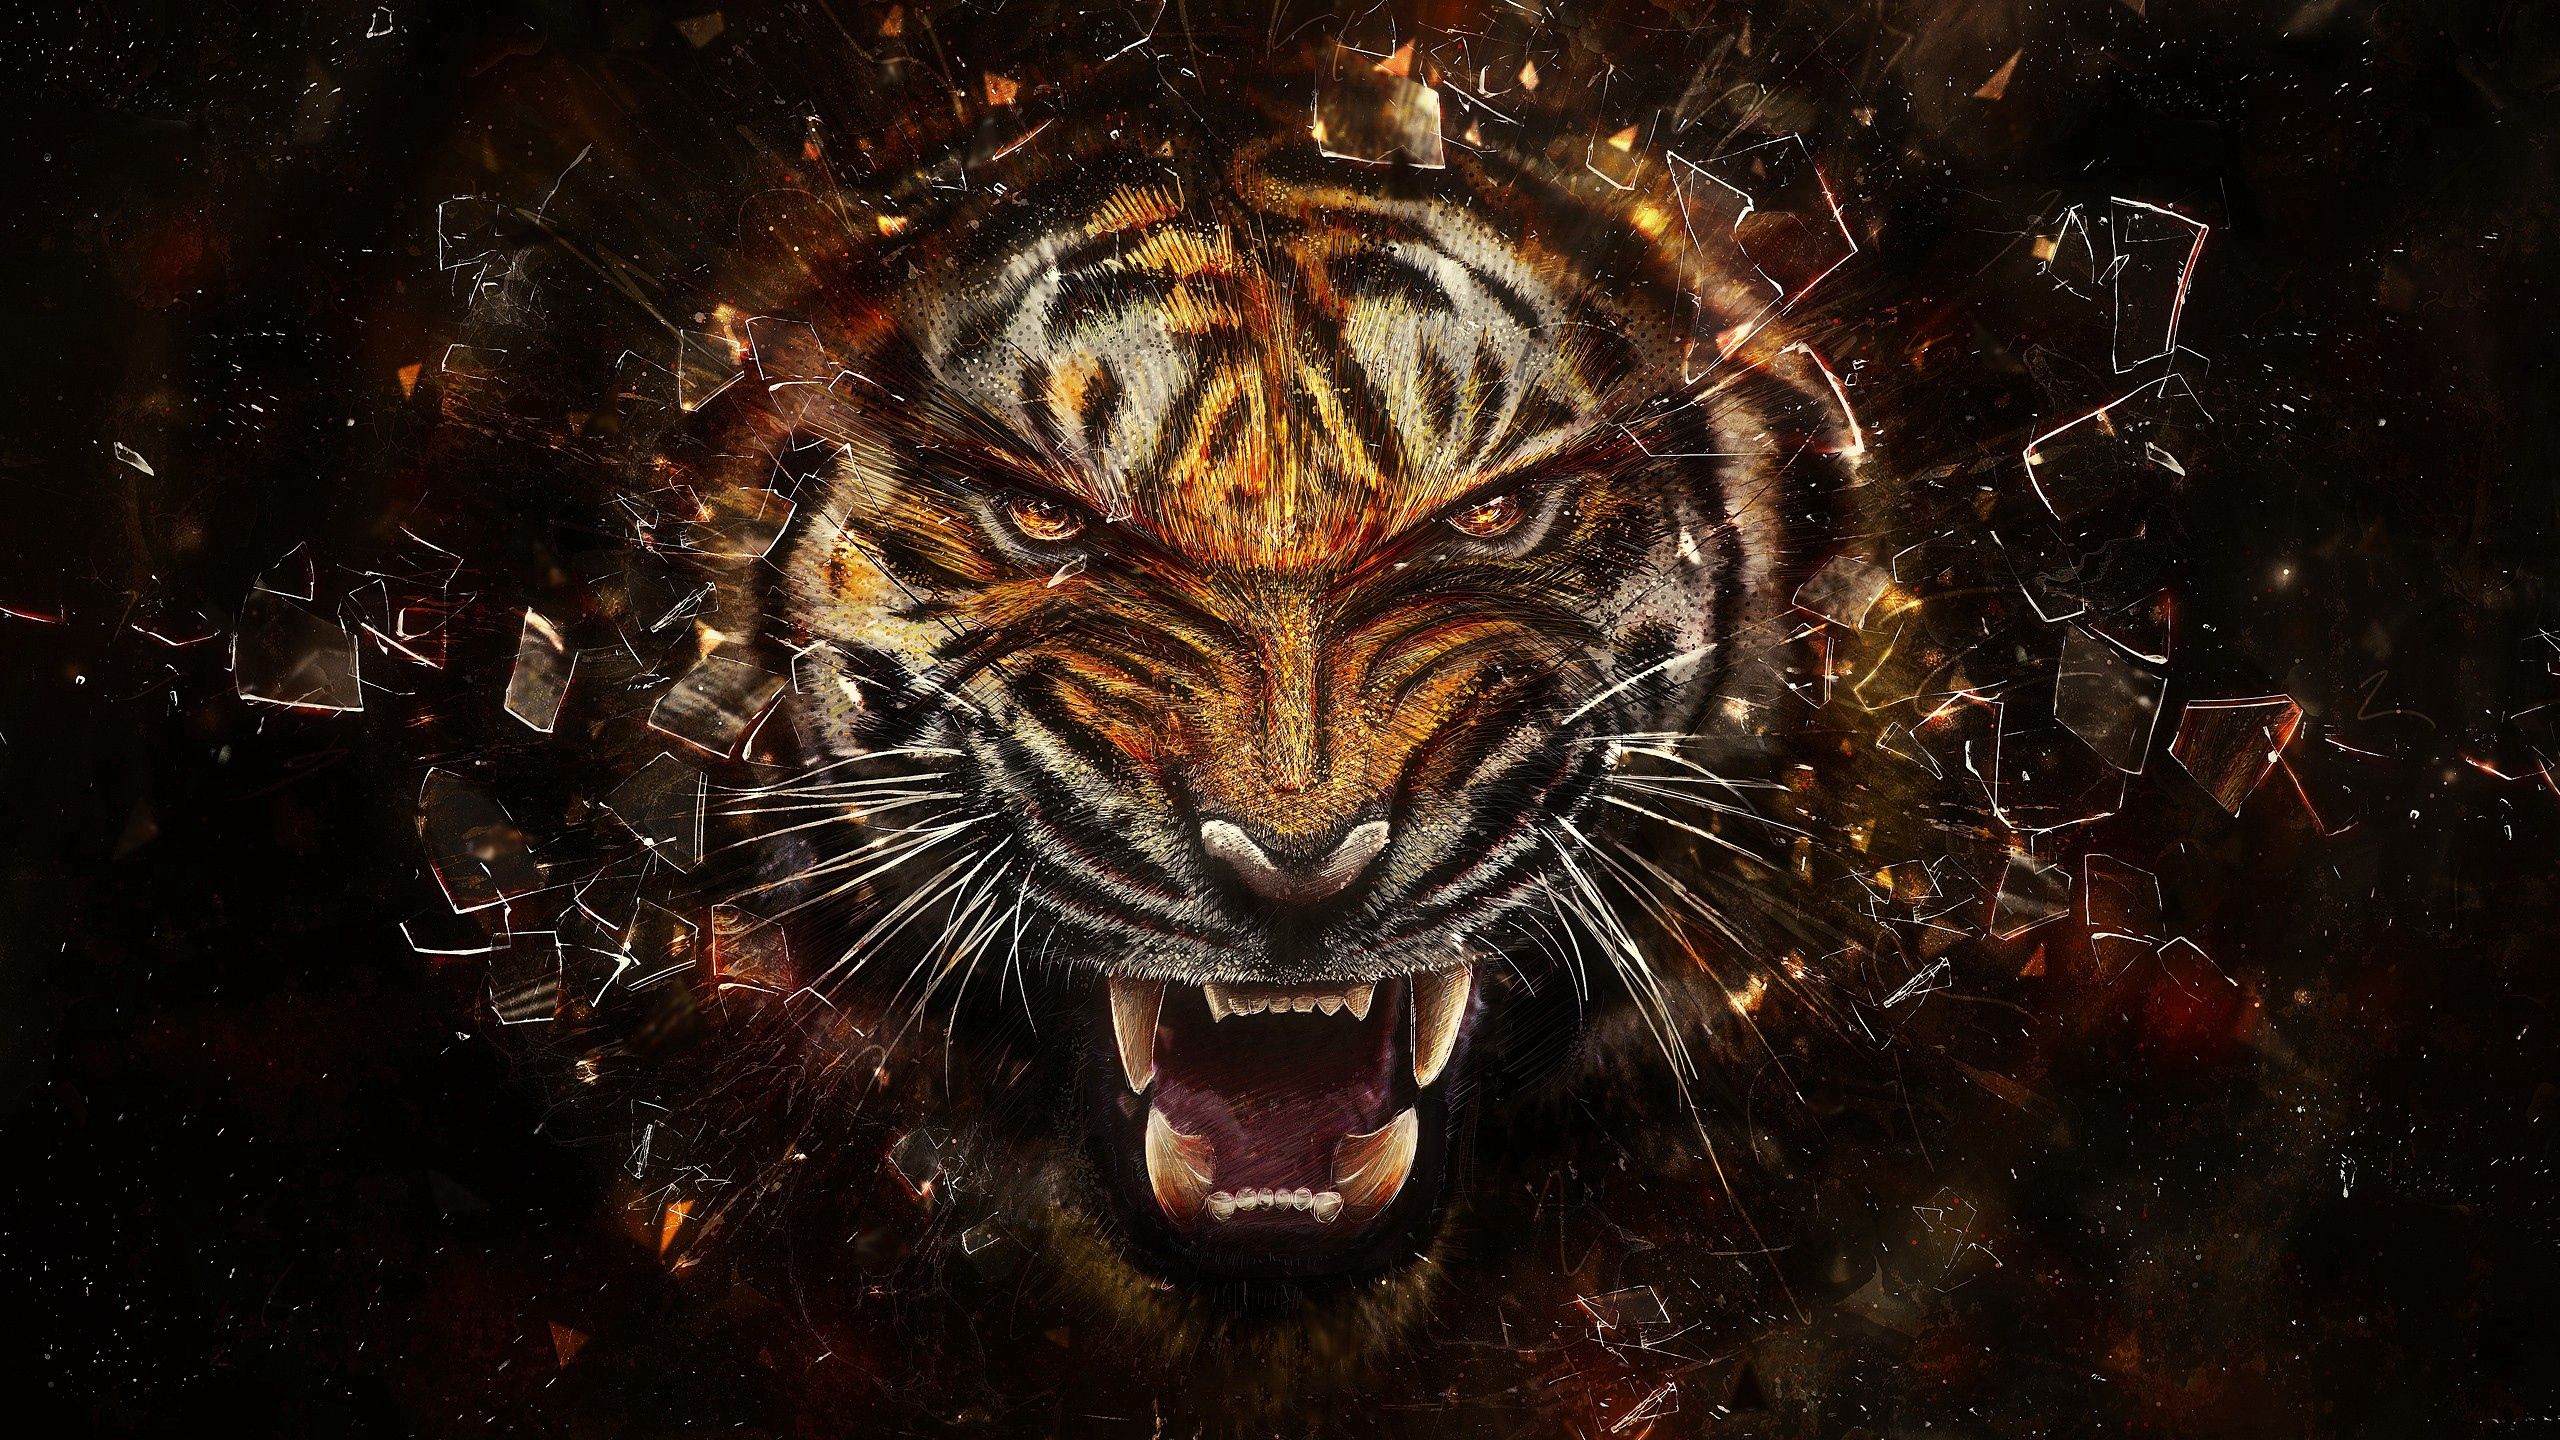 aggression, smithereens, tiger, abstract, grin, glass, shards mobile wallpaper